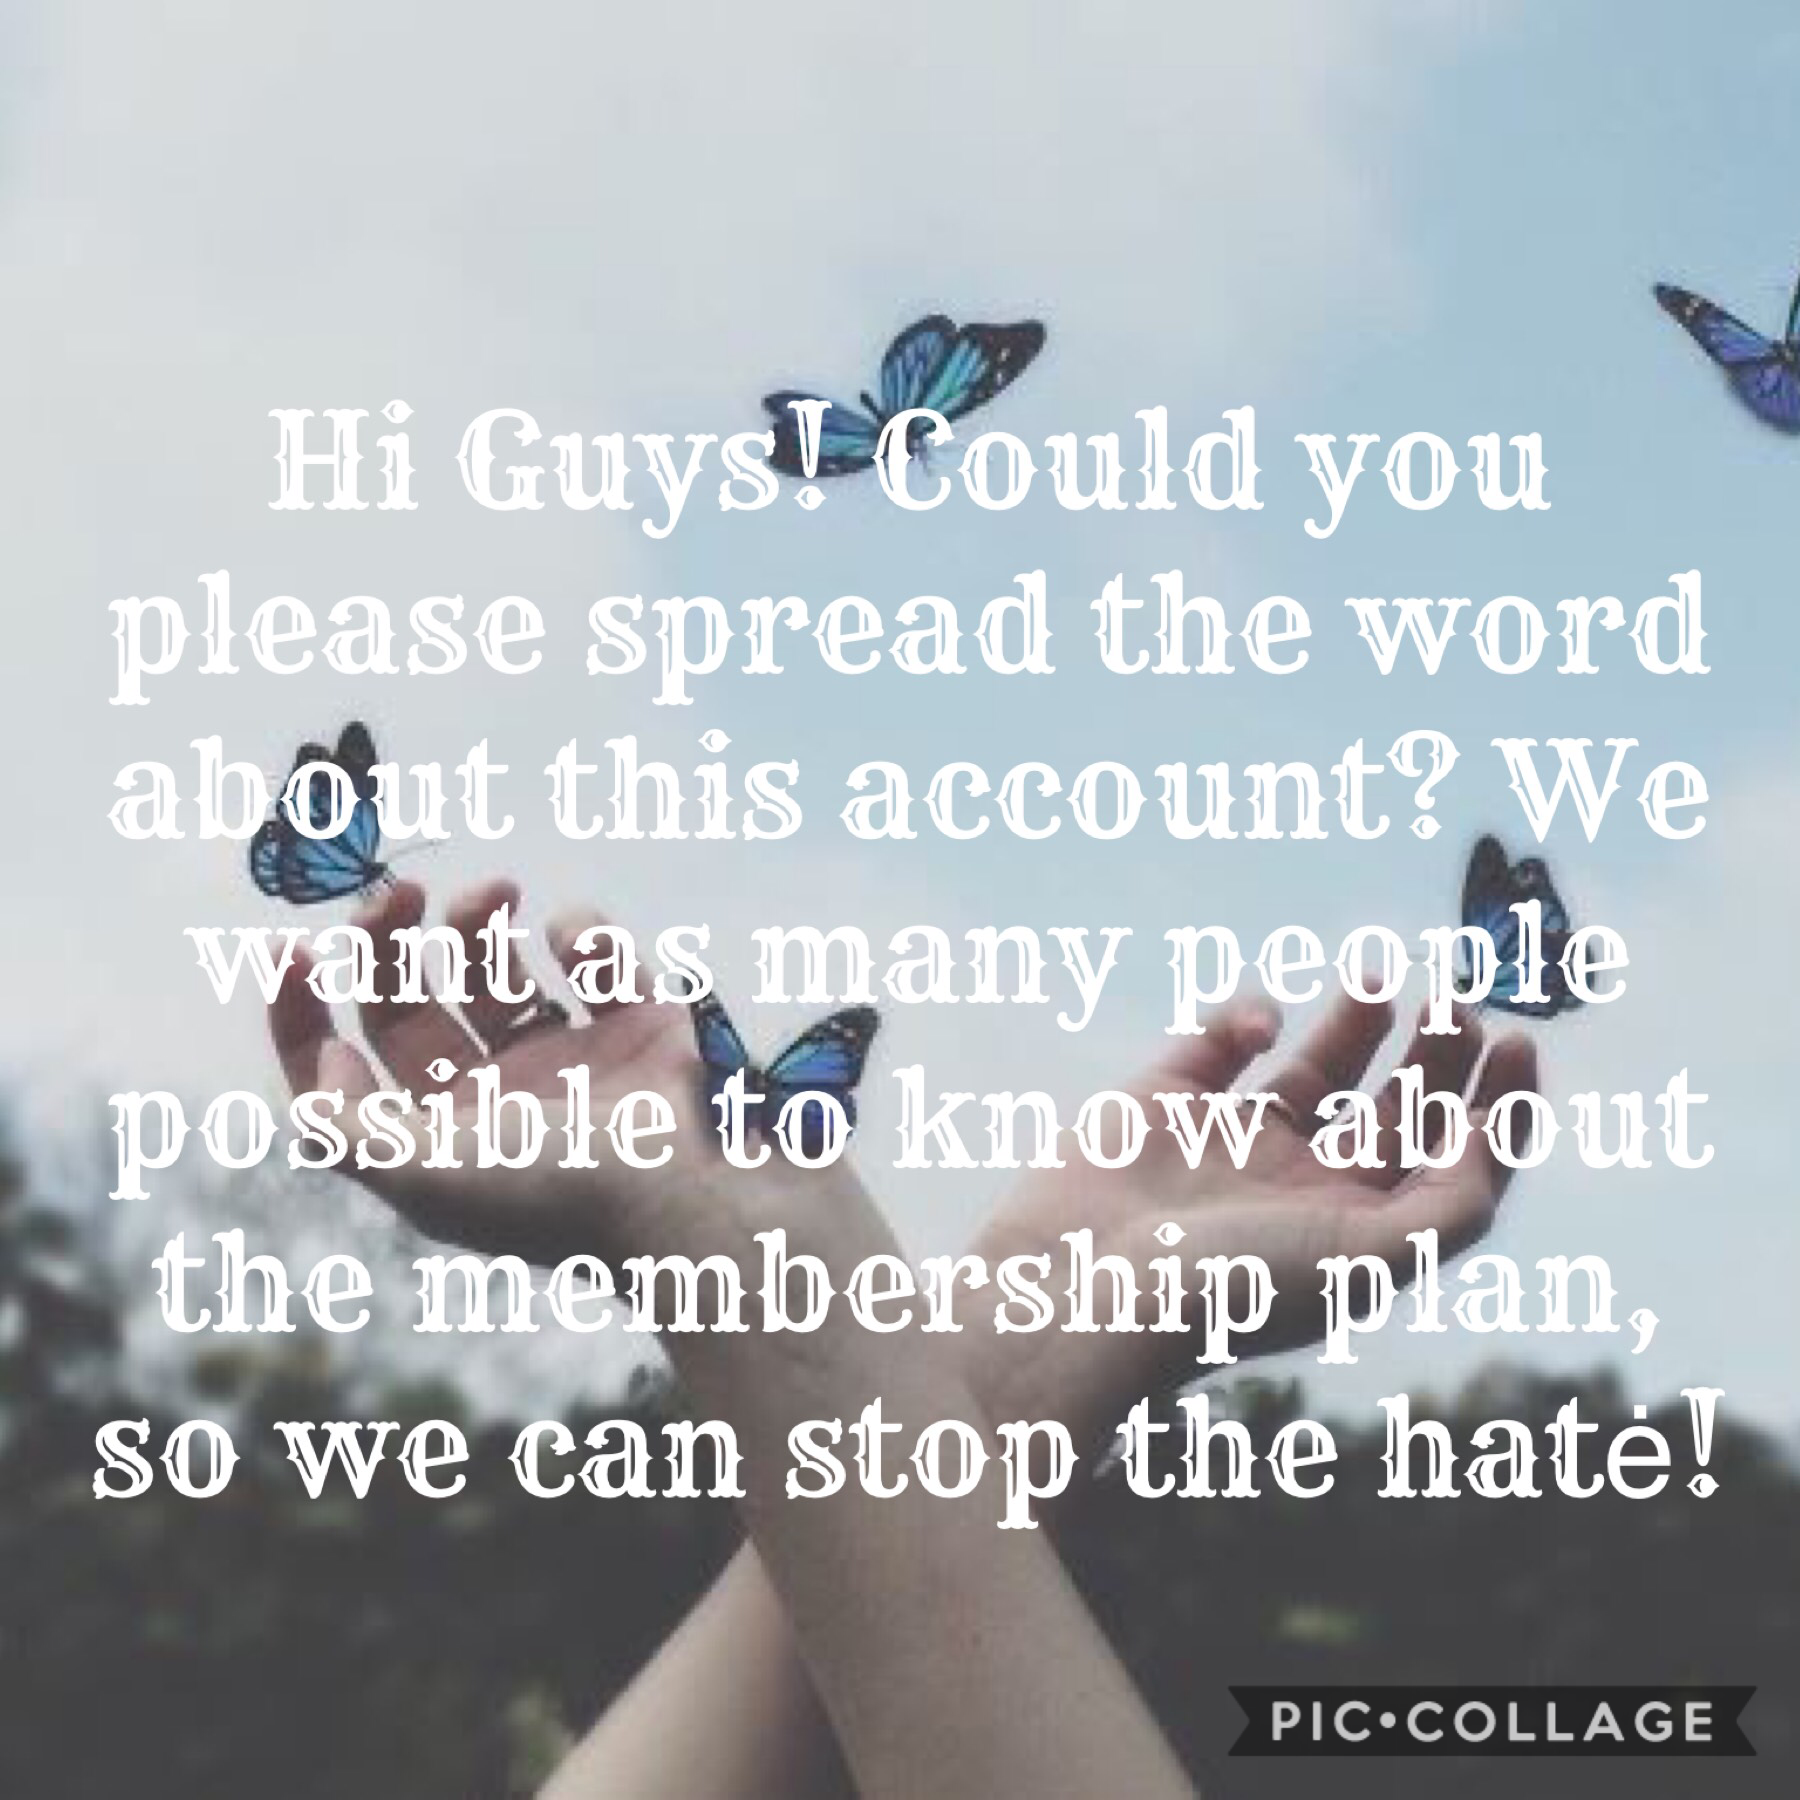 Spread The Word!